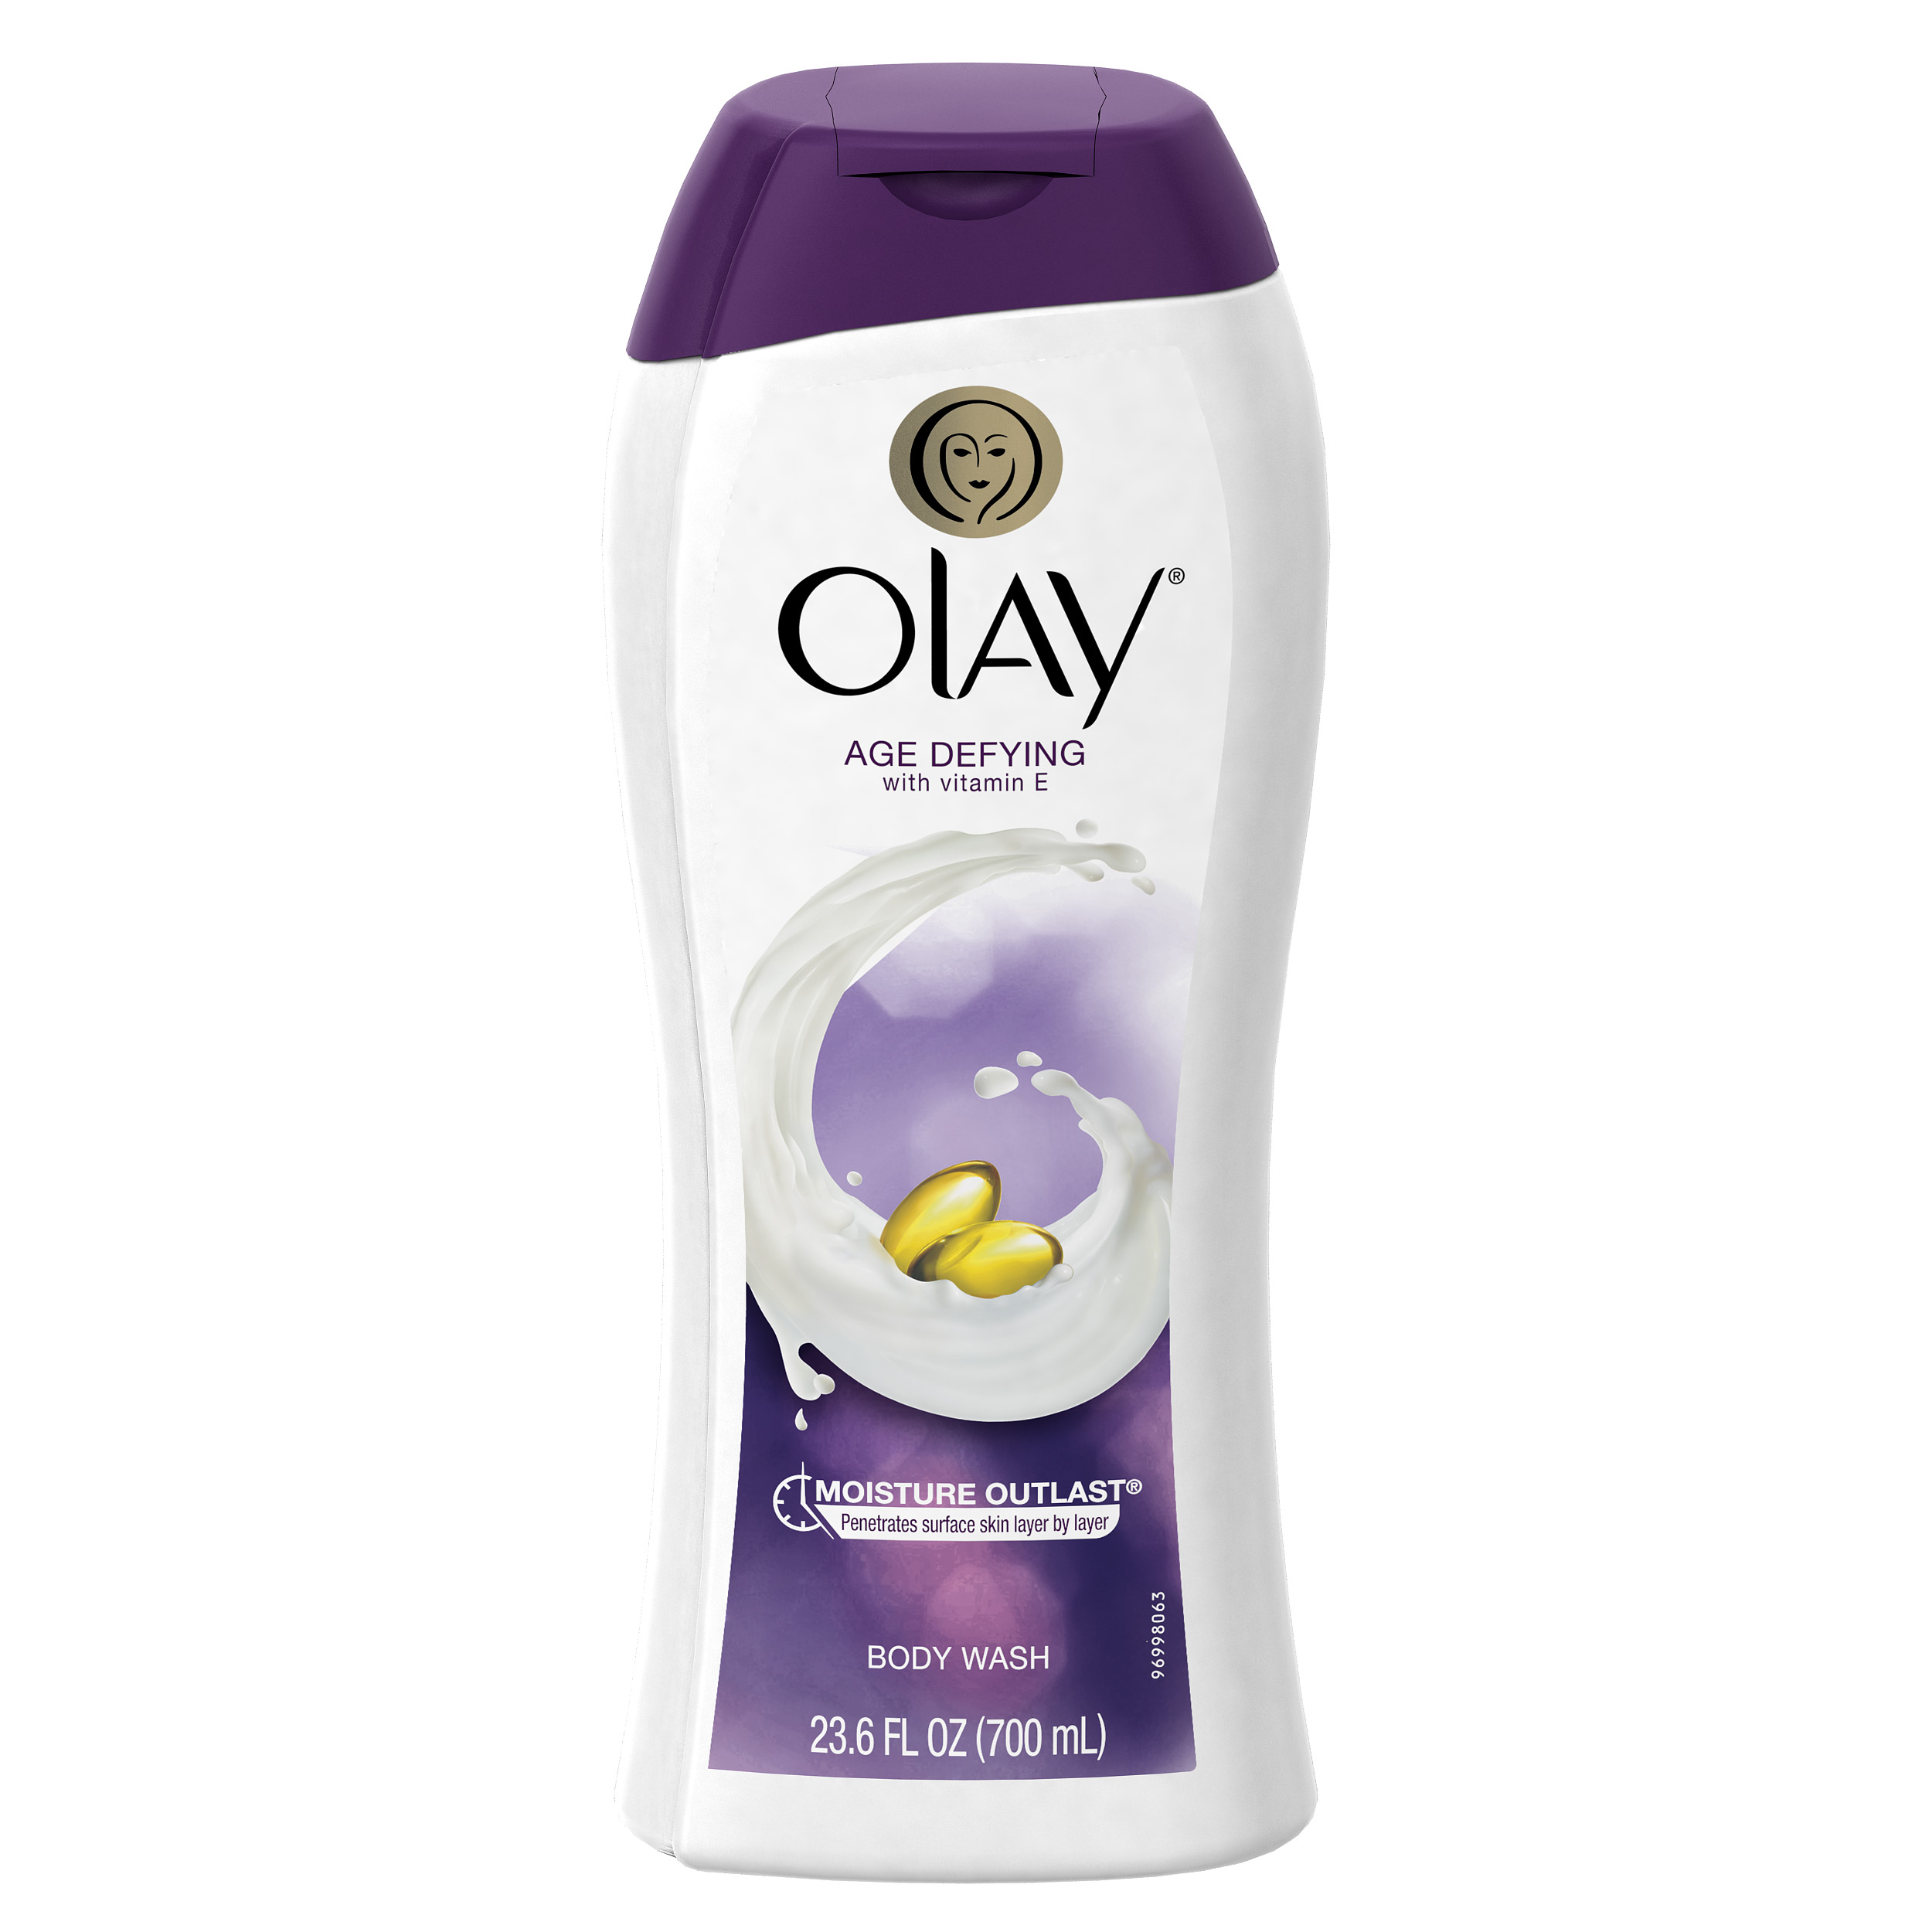 Olay Age Defying Body Wash With Vitamin E 23.6oz - image 4 of 5